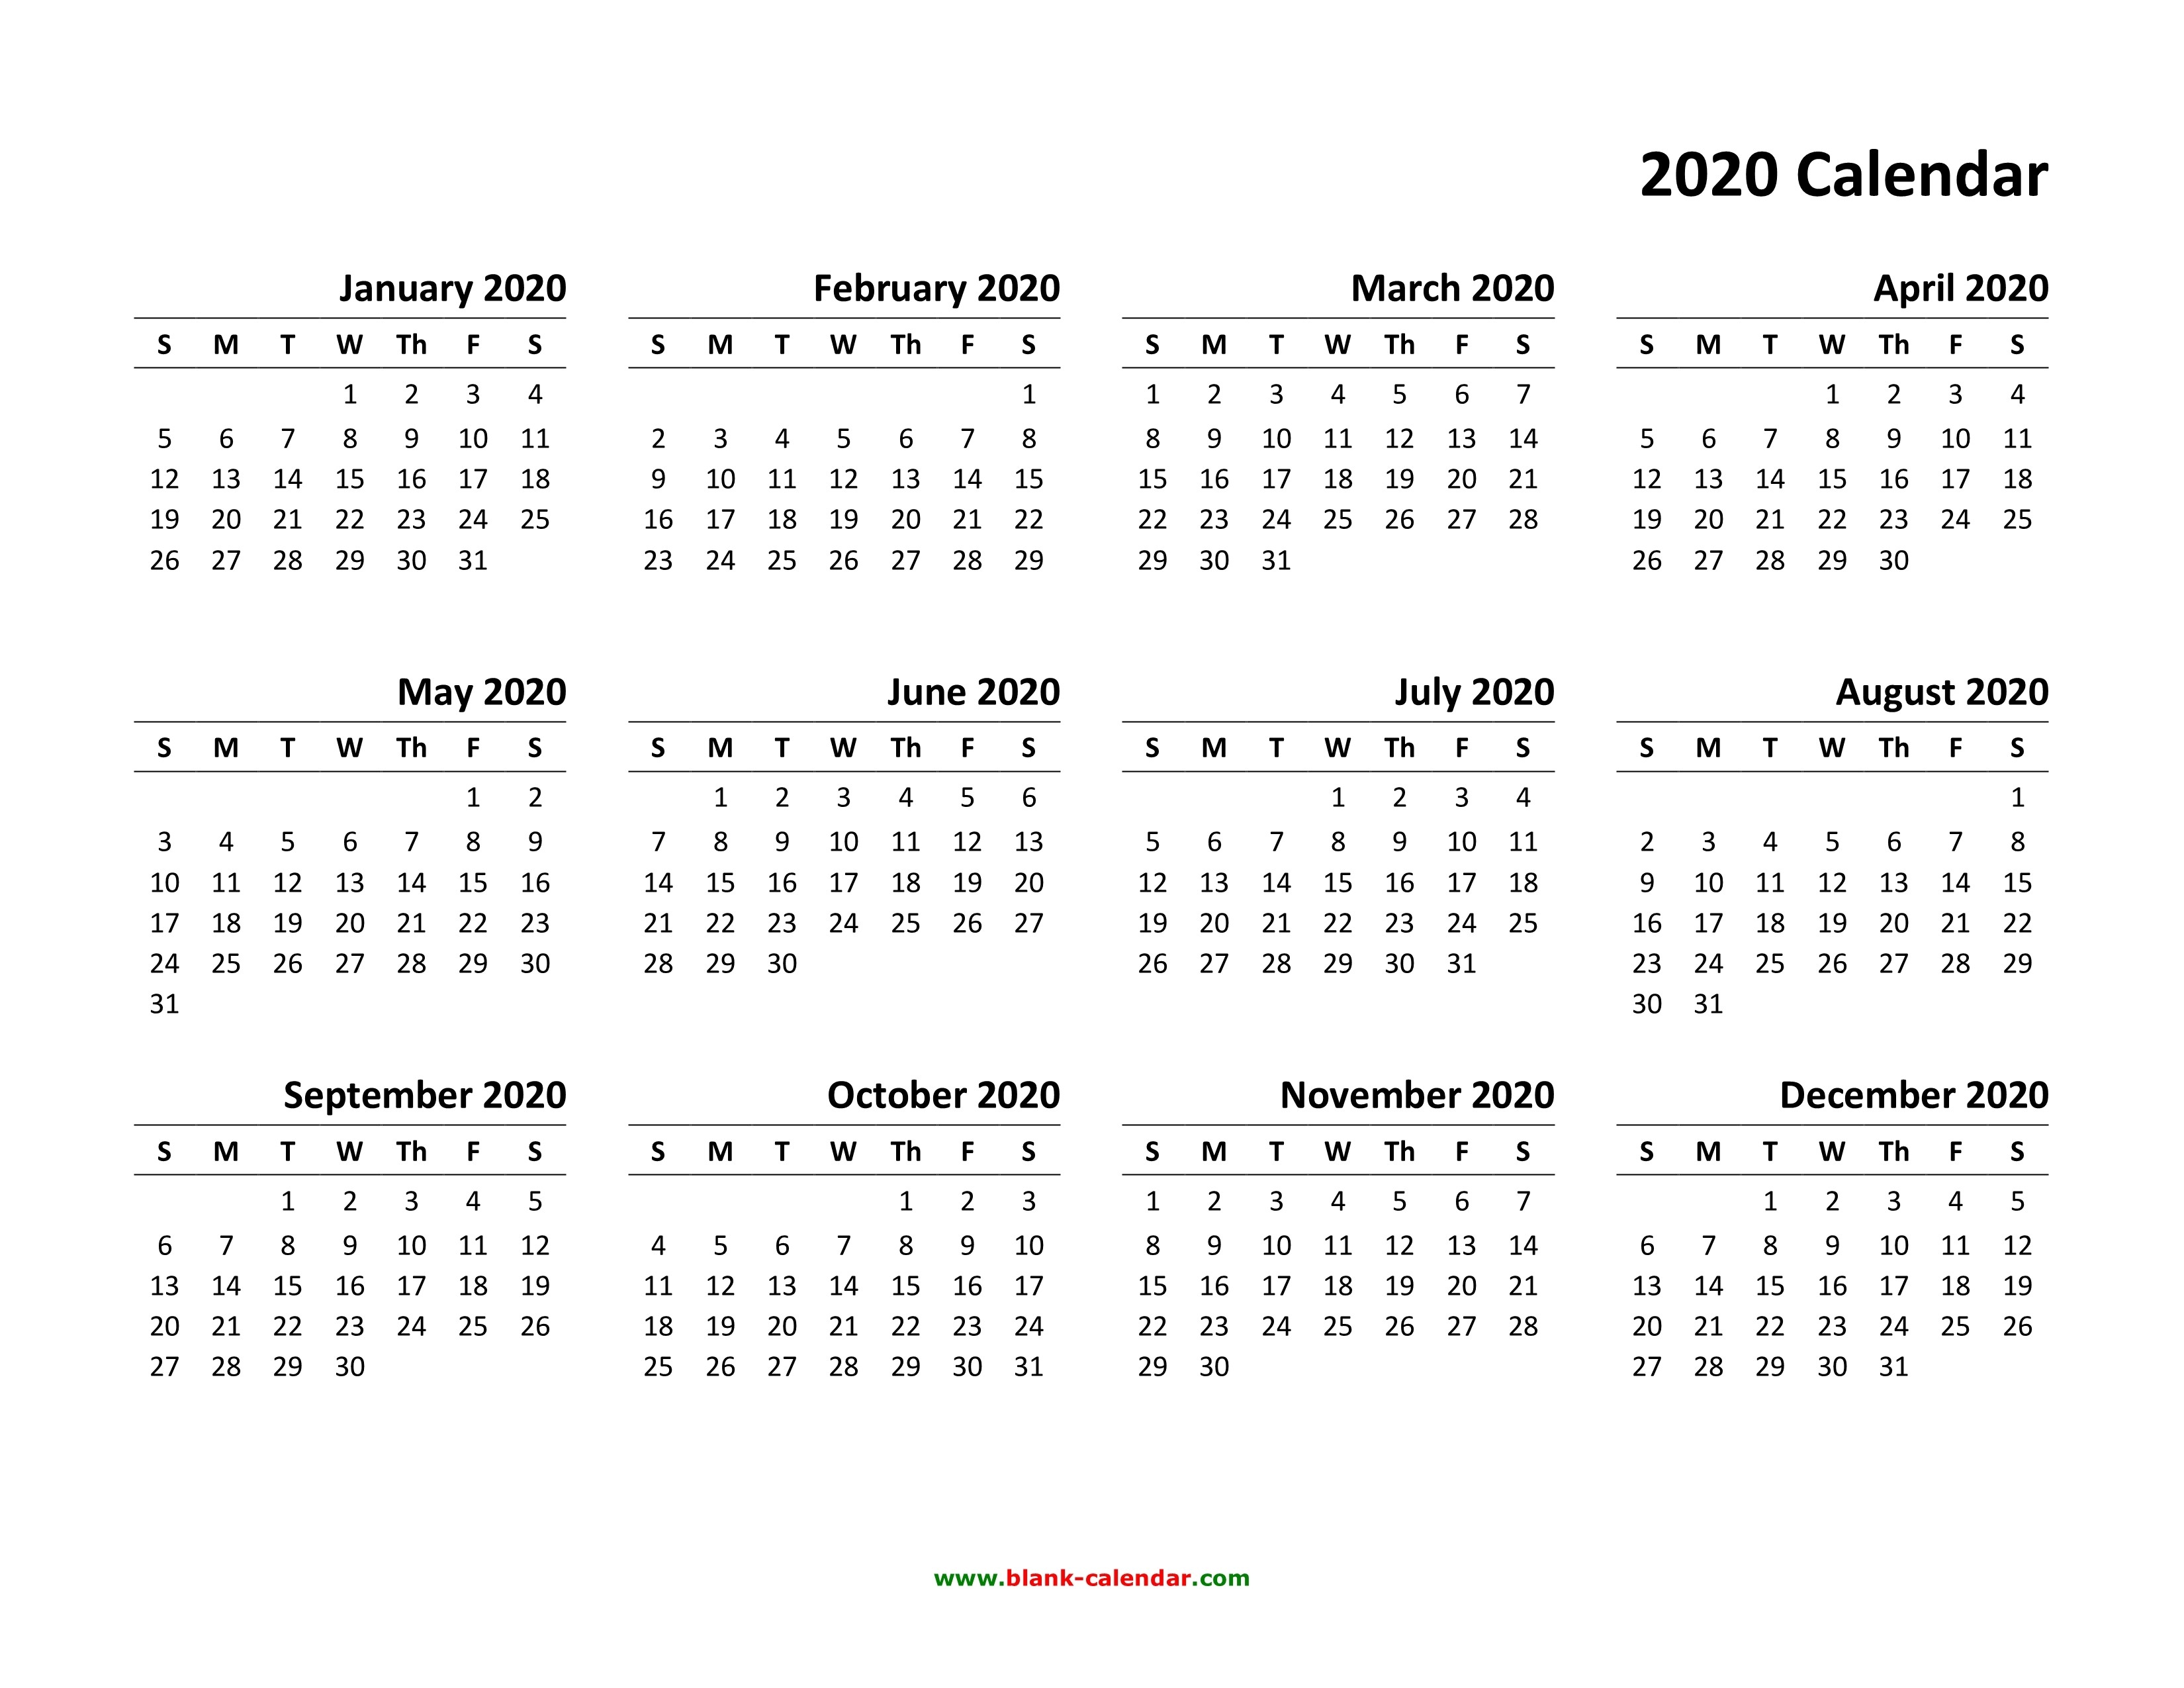 Yearly Calendar 2020 | Free Download And Print-W 9 Template 2020